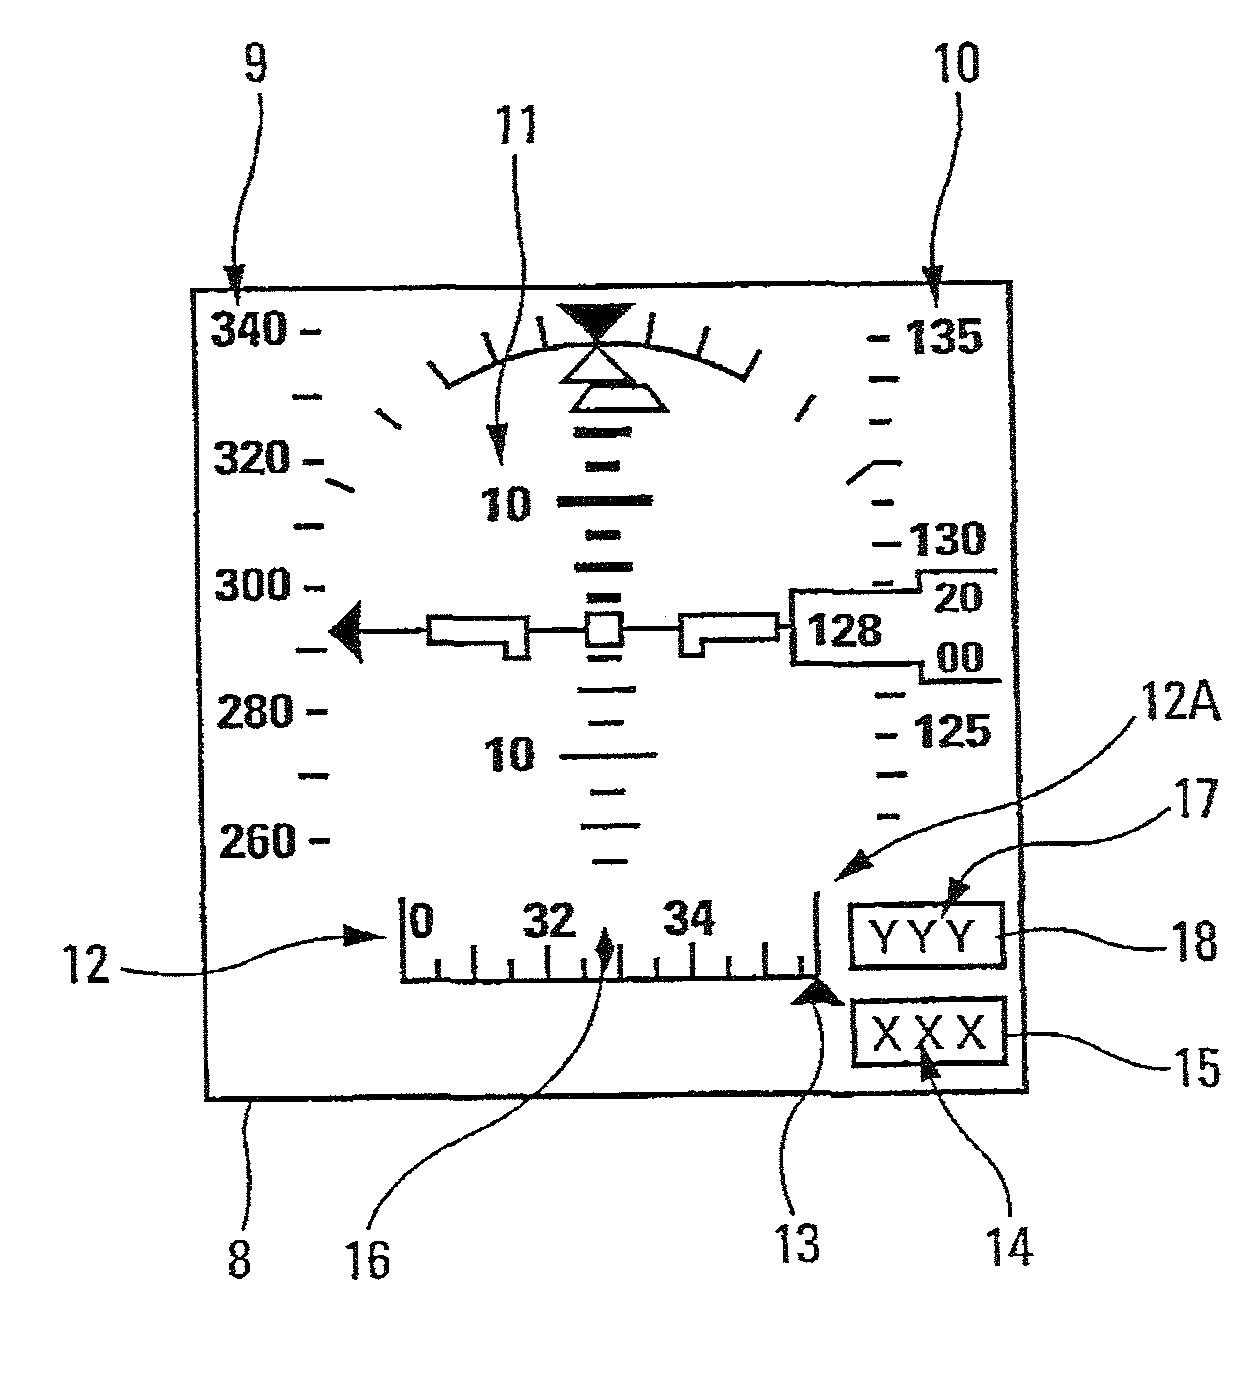 Aircraft standby display device